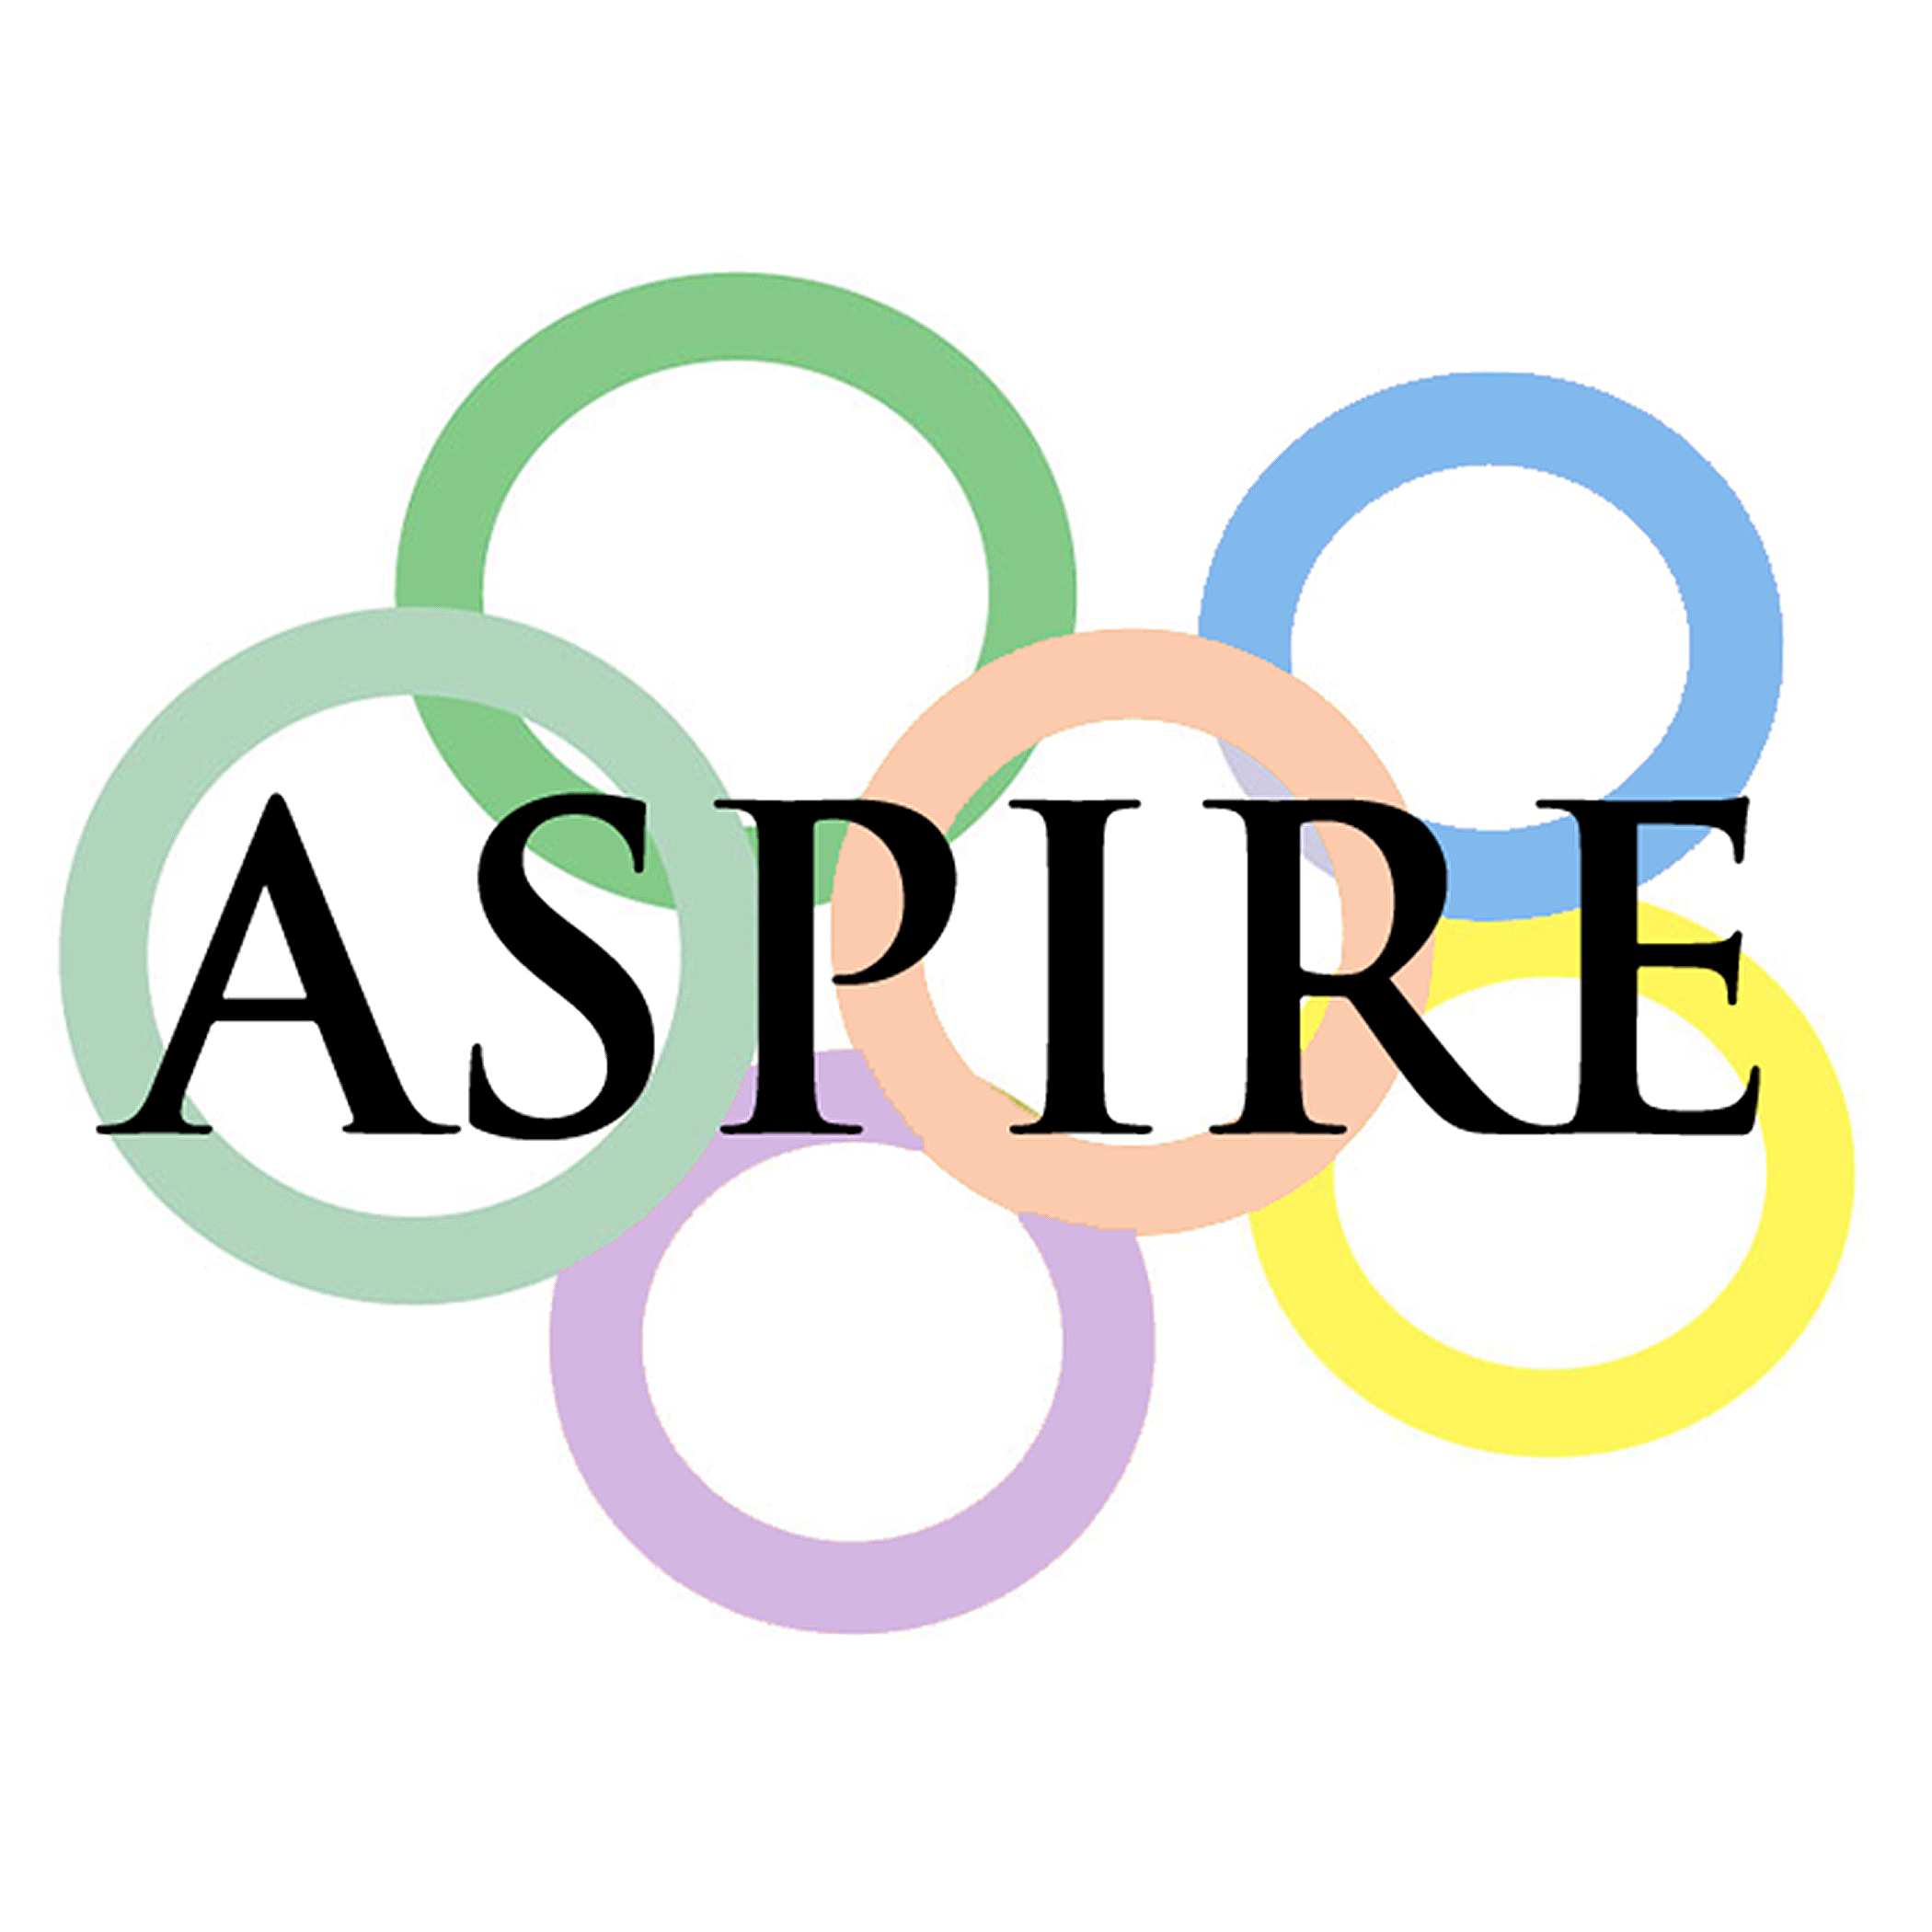 ASPIRE-Rings-Circle-for-ASPIRE-ON